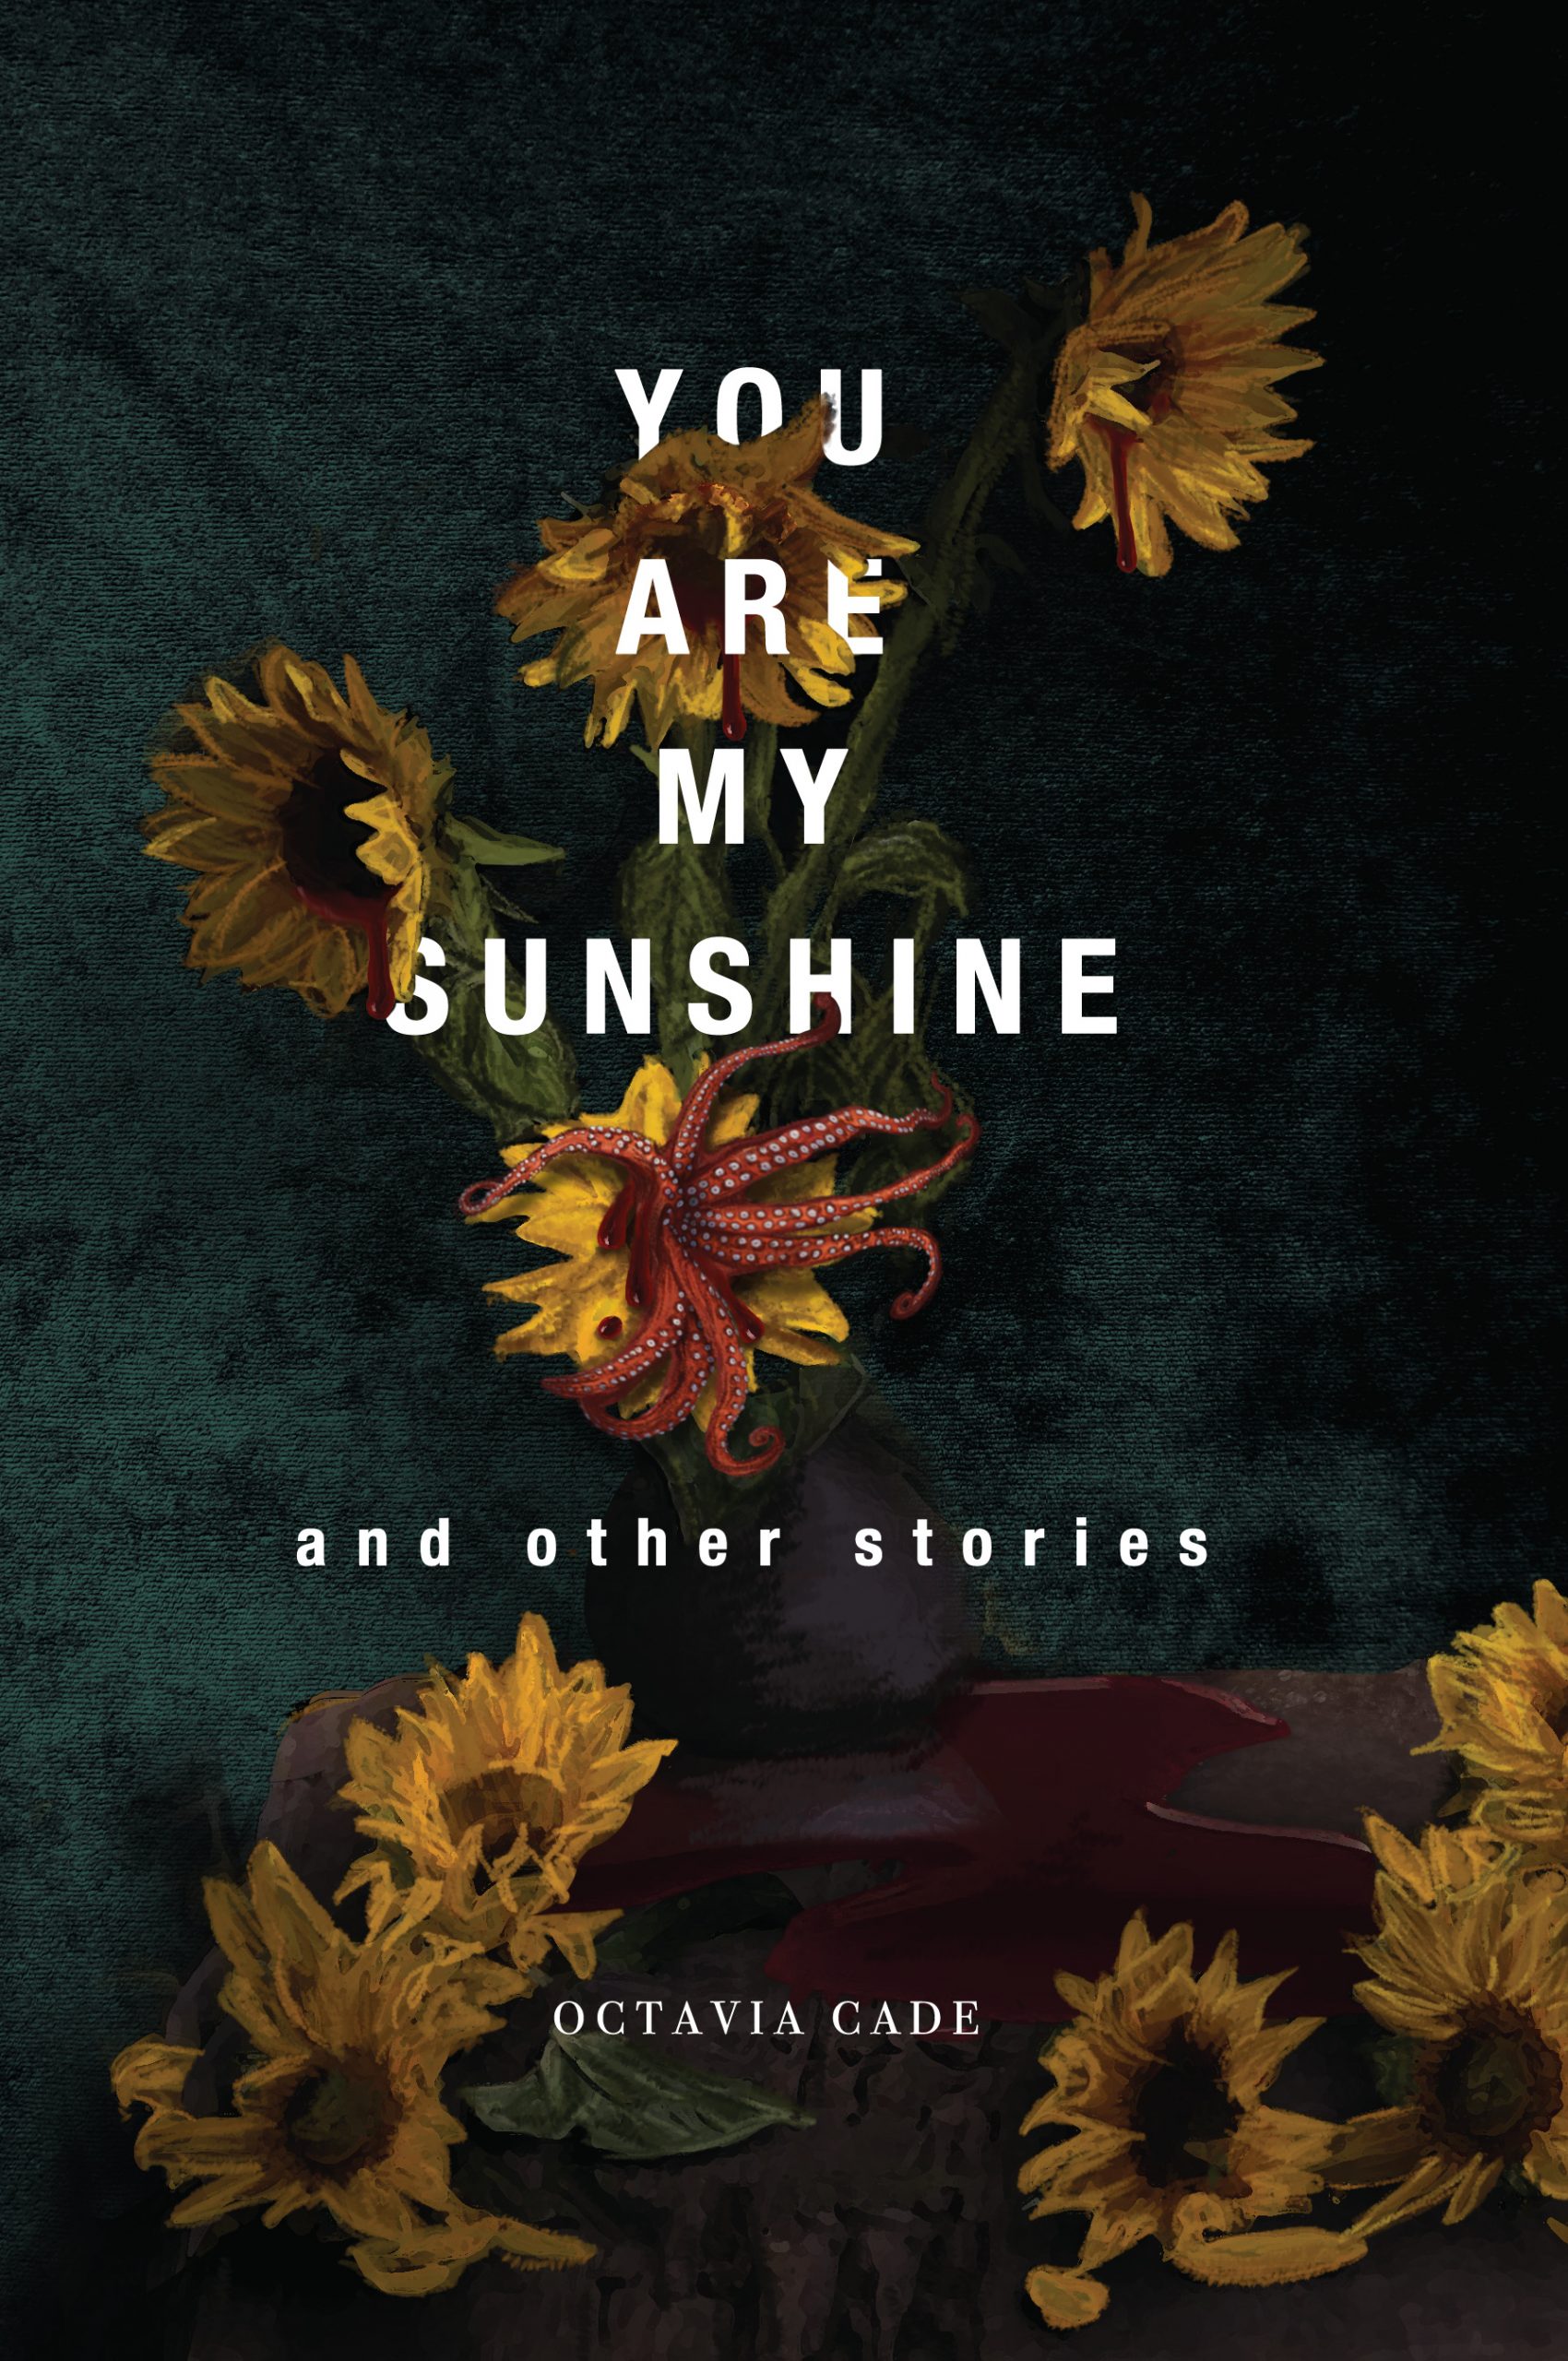 You Are My Sunshine and Other Stories by Octavia Cade